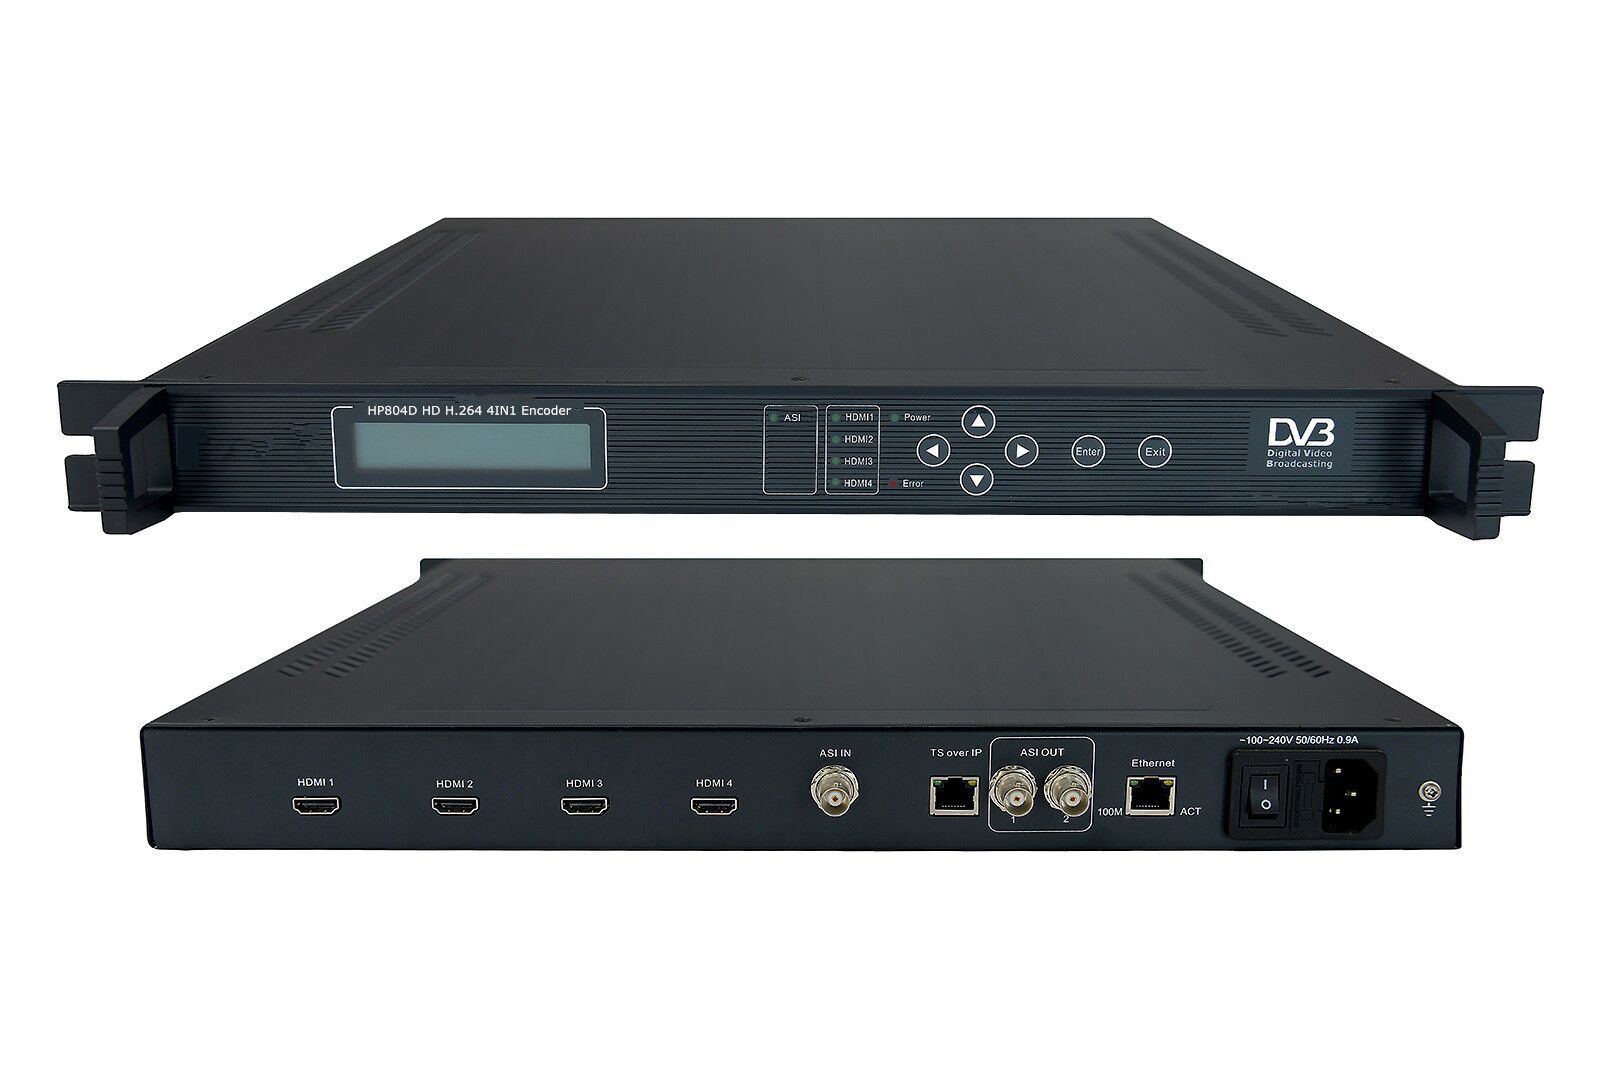 HP804D 4 in 1 H. 264 HDMI Encoder with 4 HDMI Input and IP Output